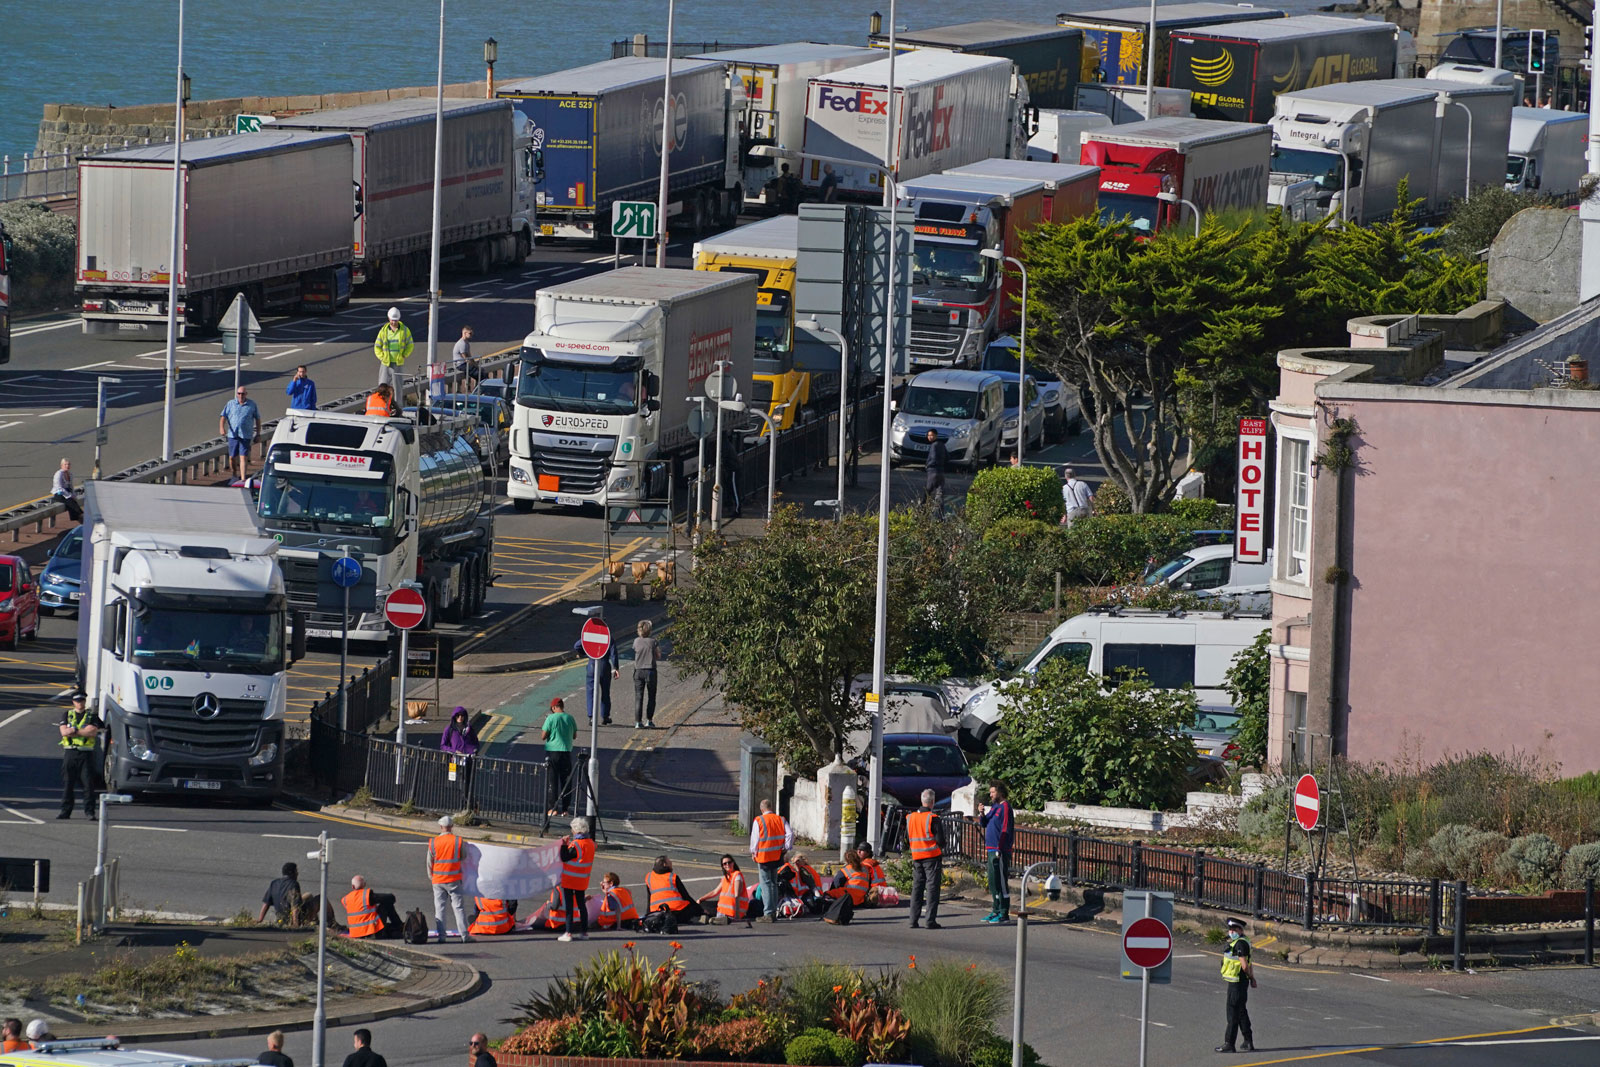 Protesters from Insulate Britain block the A20 which provides access to the Port of Dover, in Kent, England on Friday, September 24.